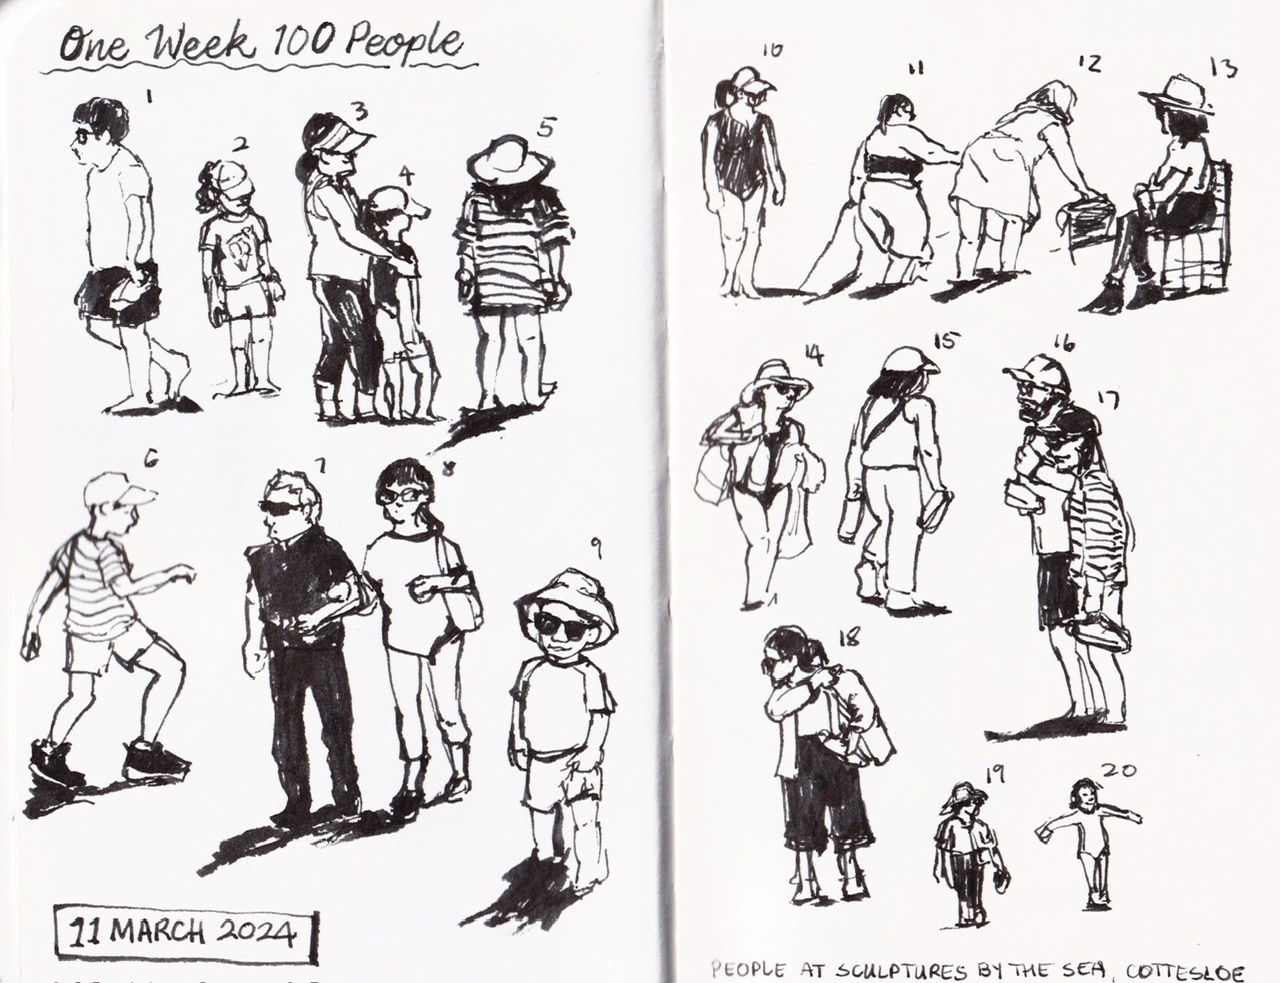 sketchbook 6 21.jpeg|pen sketches of 20 different people spotted at Cottesloe beach